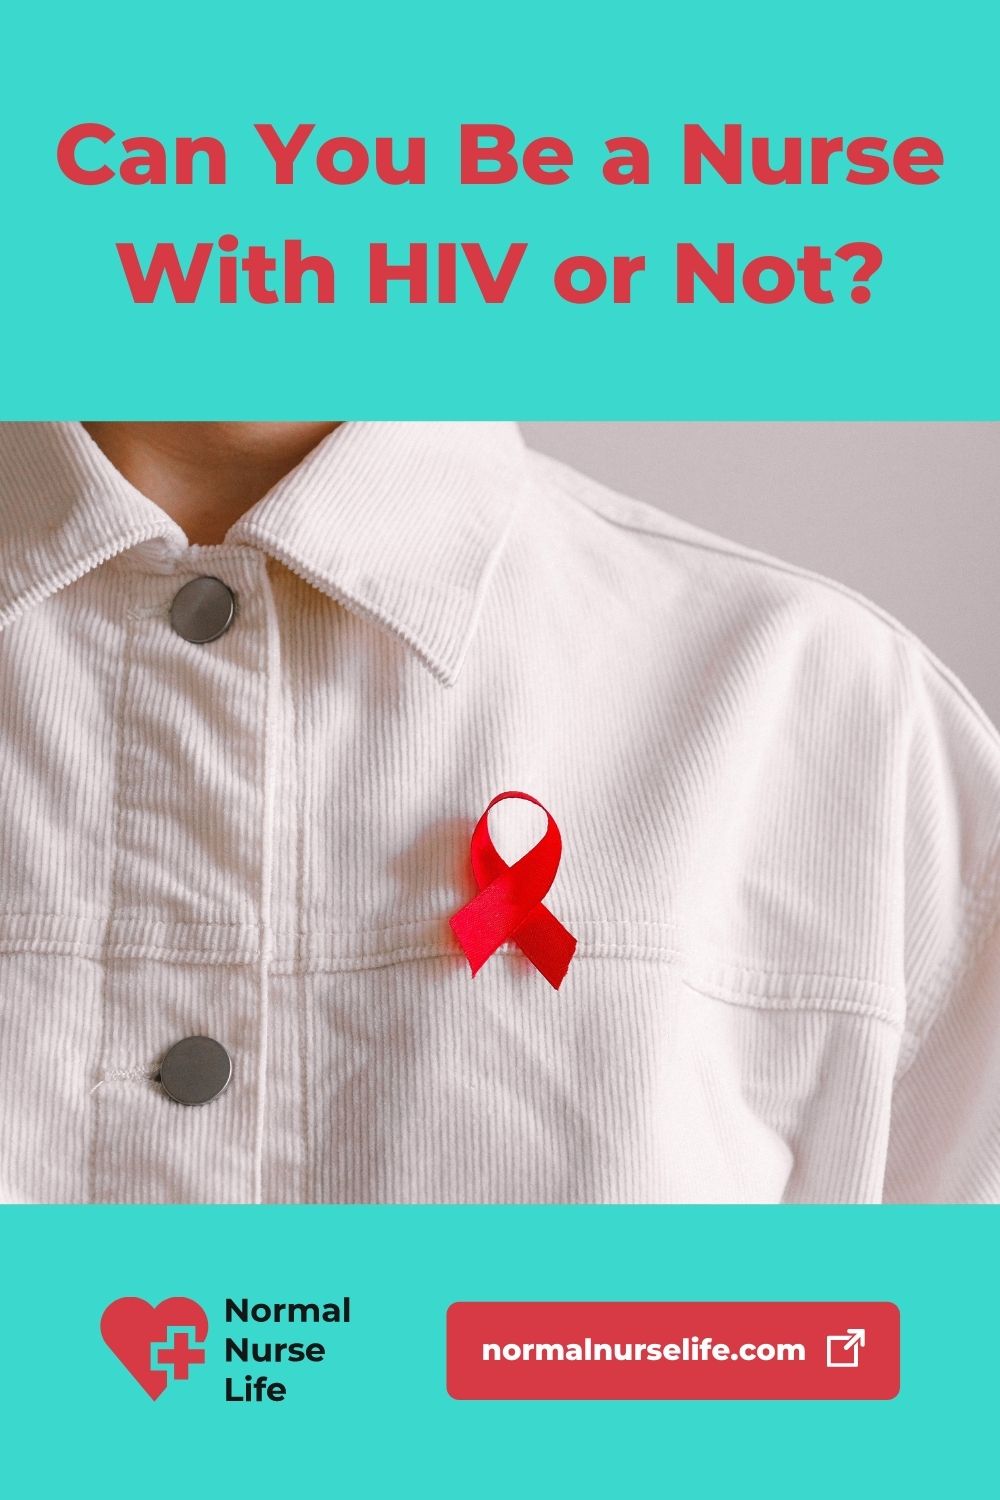 Can you be a nurse with HIV